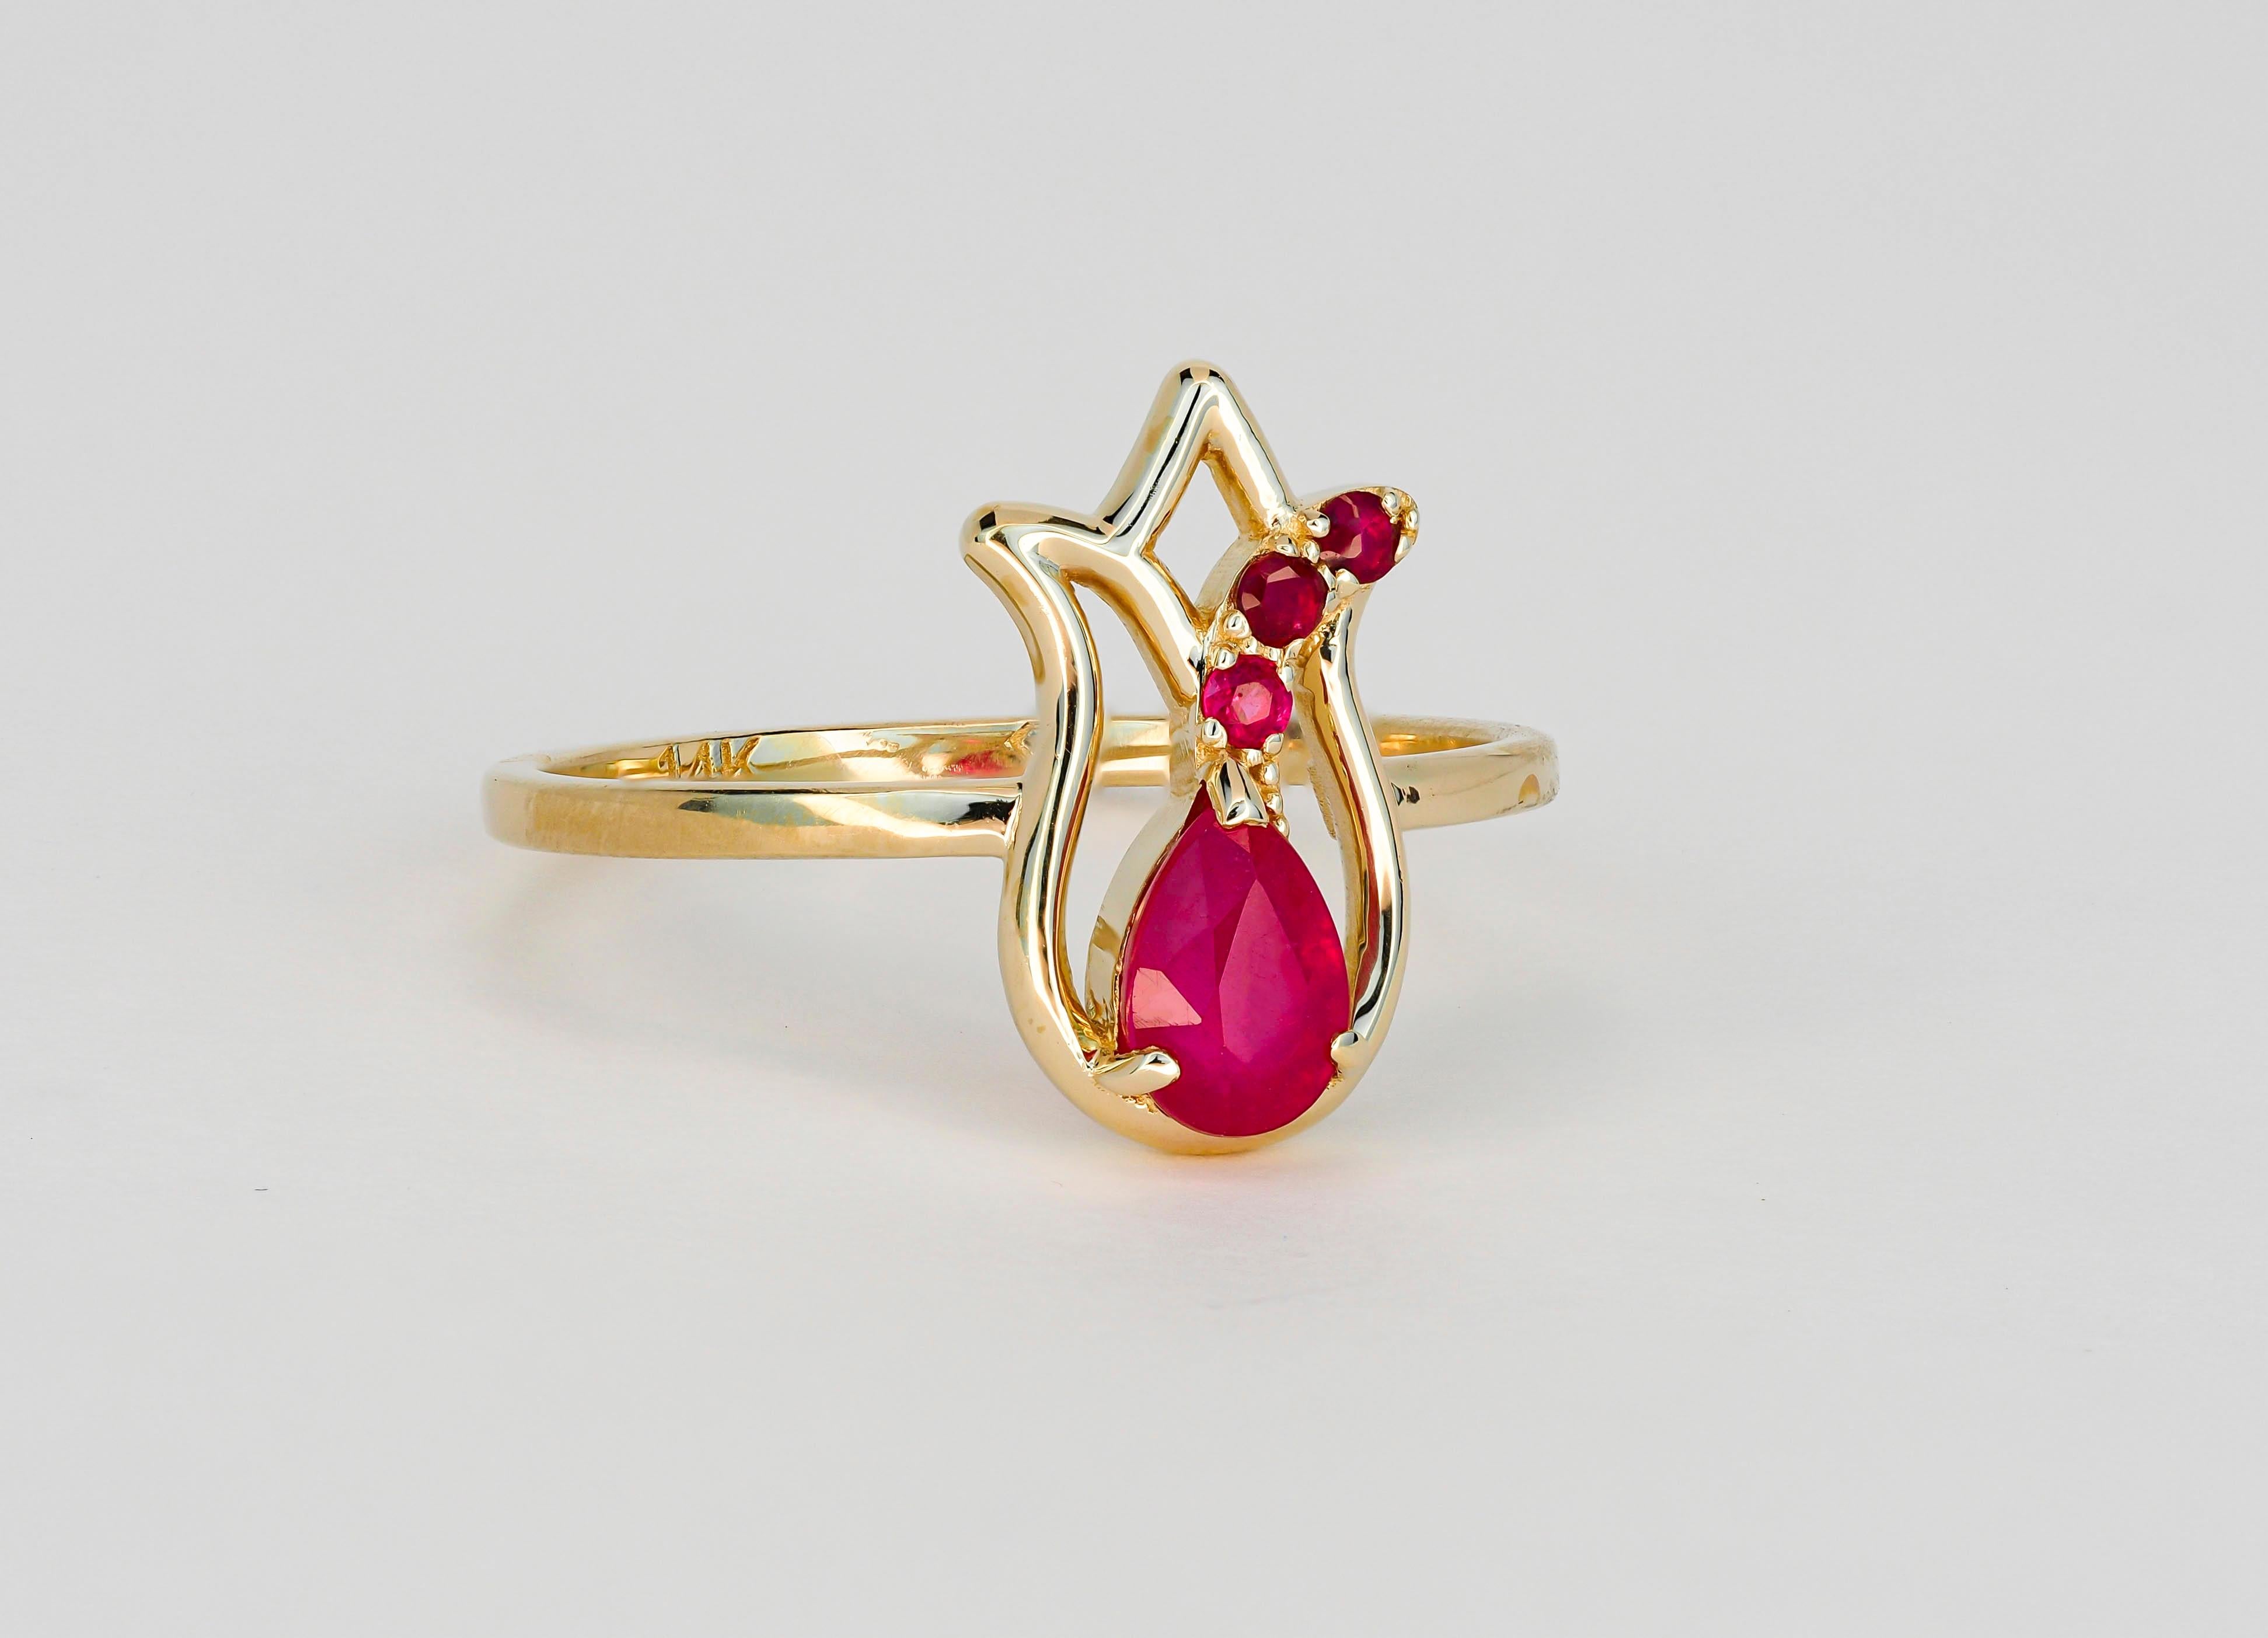 14 kt solid gold tulip ring with ruby and side rubies. July birthstone.
Weight approx. 2.00 g. - depends from size

Central stone: Natural ruby
Pear cut, weight - 0.70 ct, color - red
Clarity: Transparent with inclusions  
Surrounding stone:
Natural